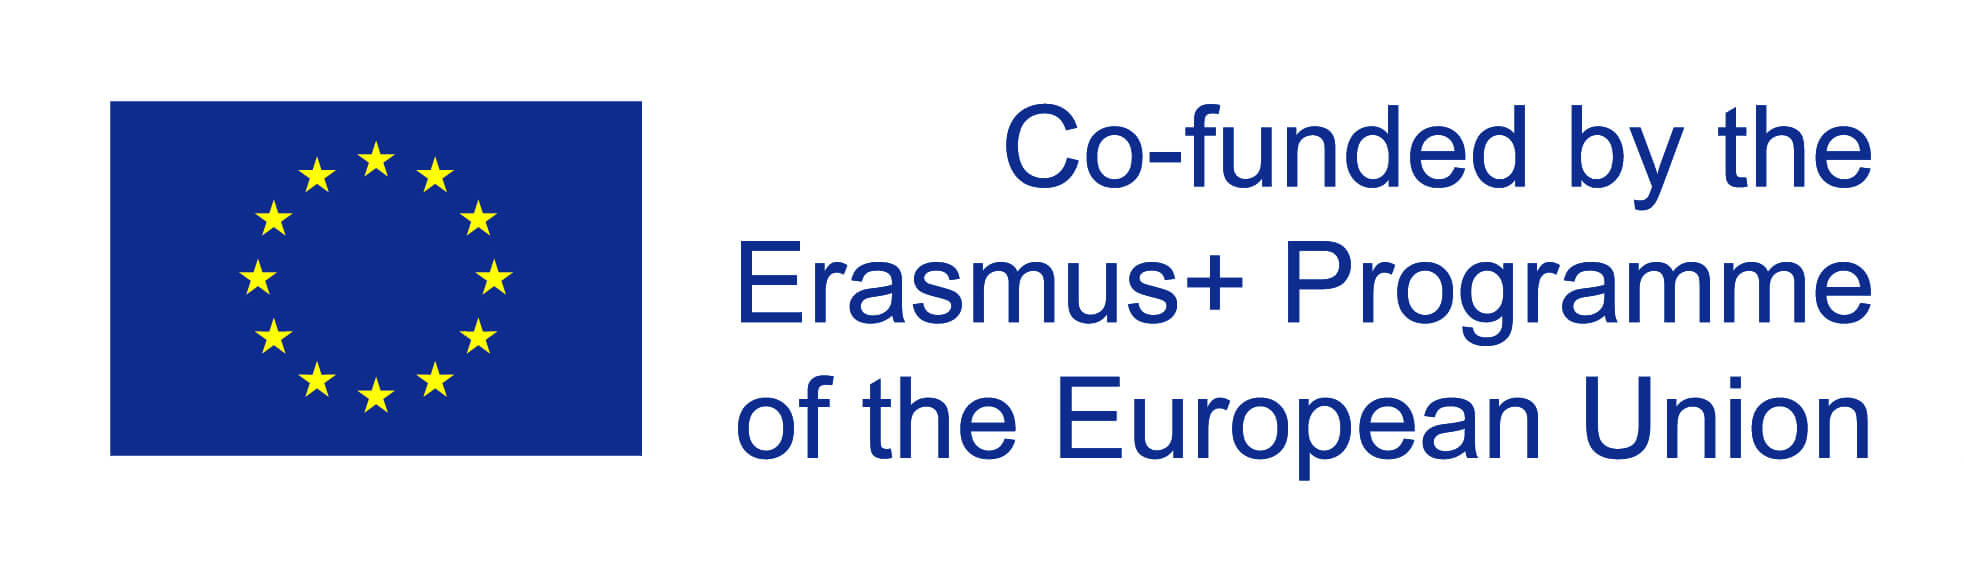 Co-funded ba the Erasmus+ Programme